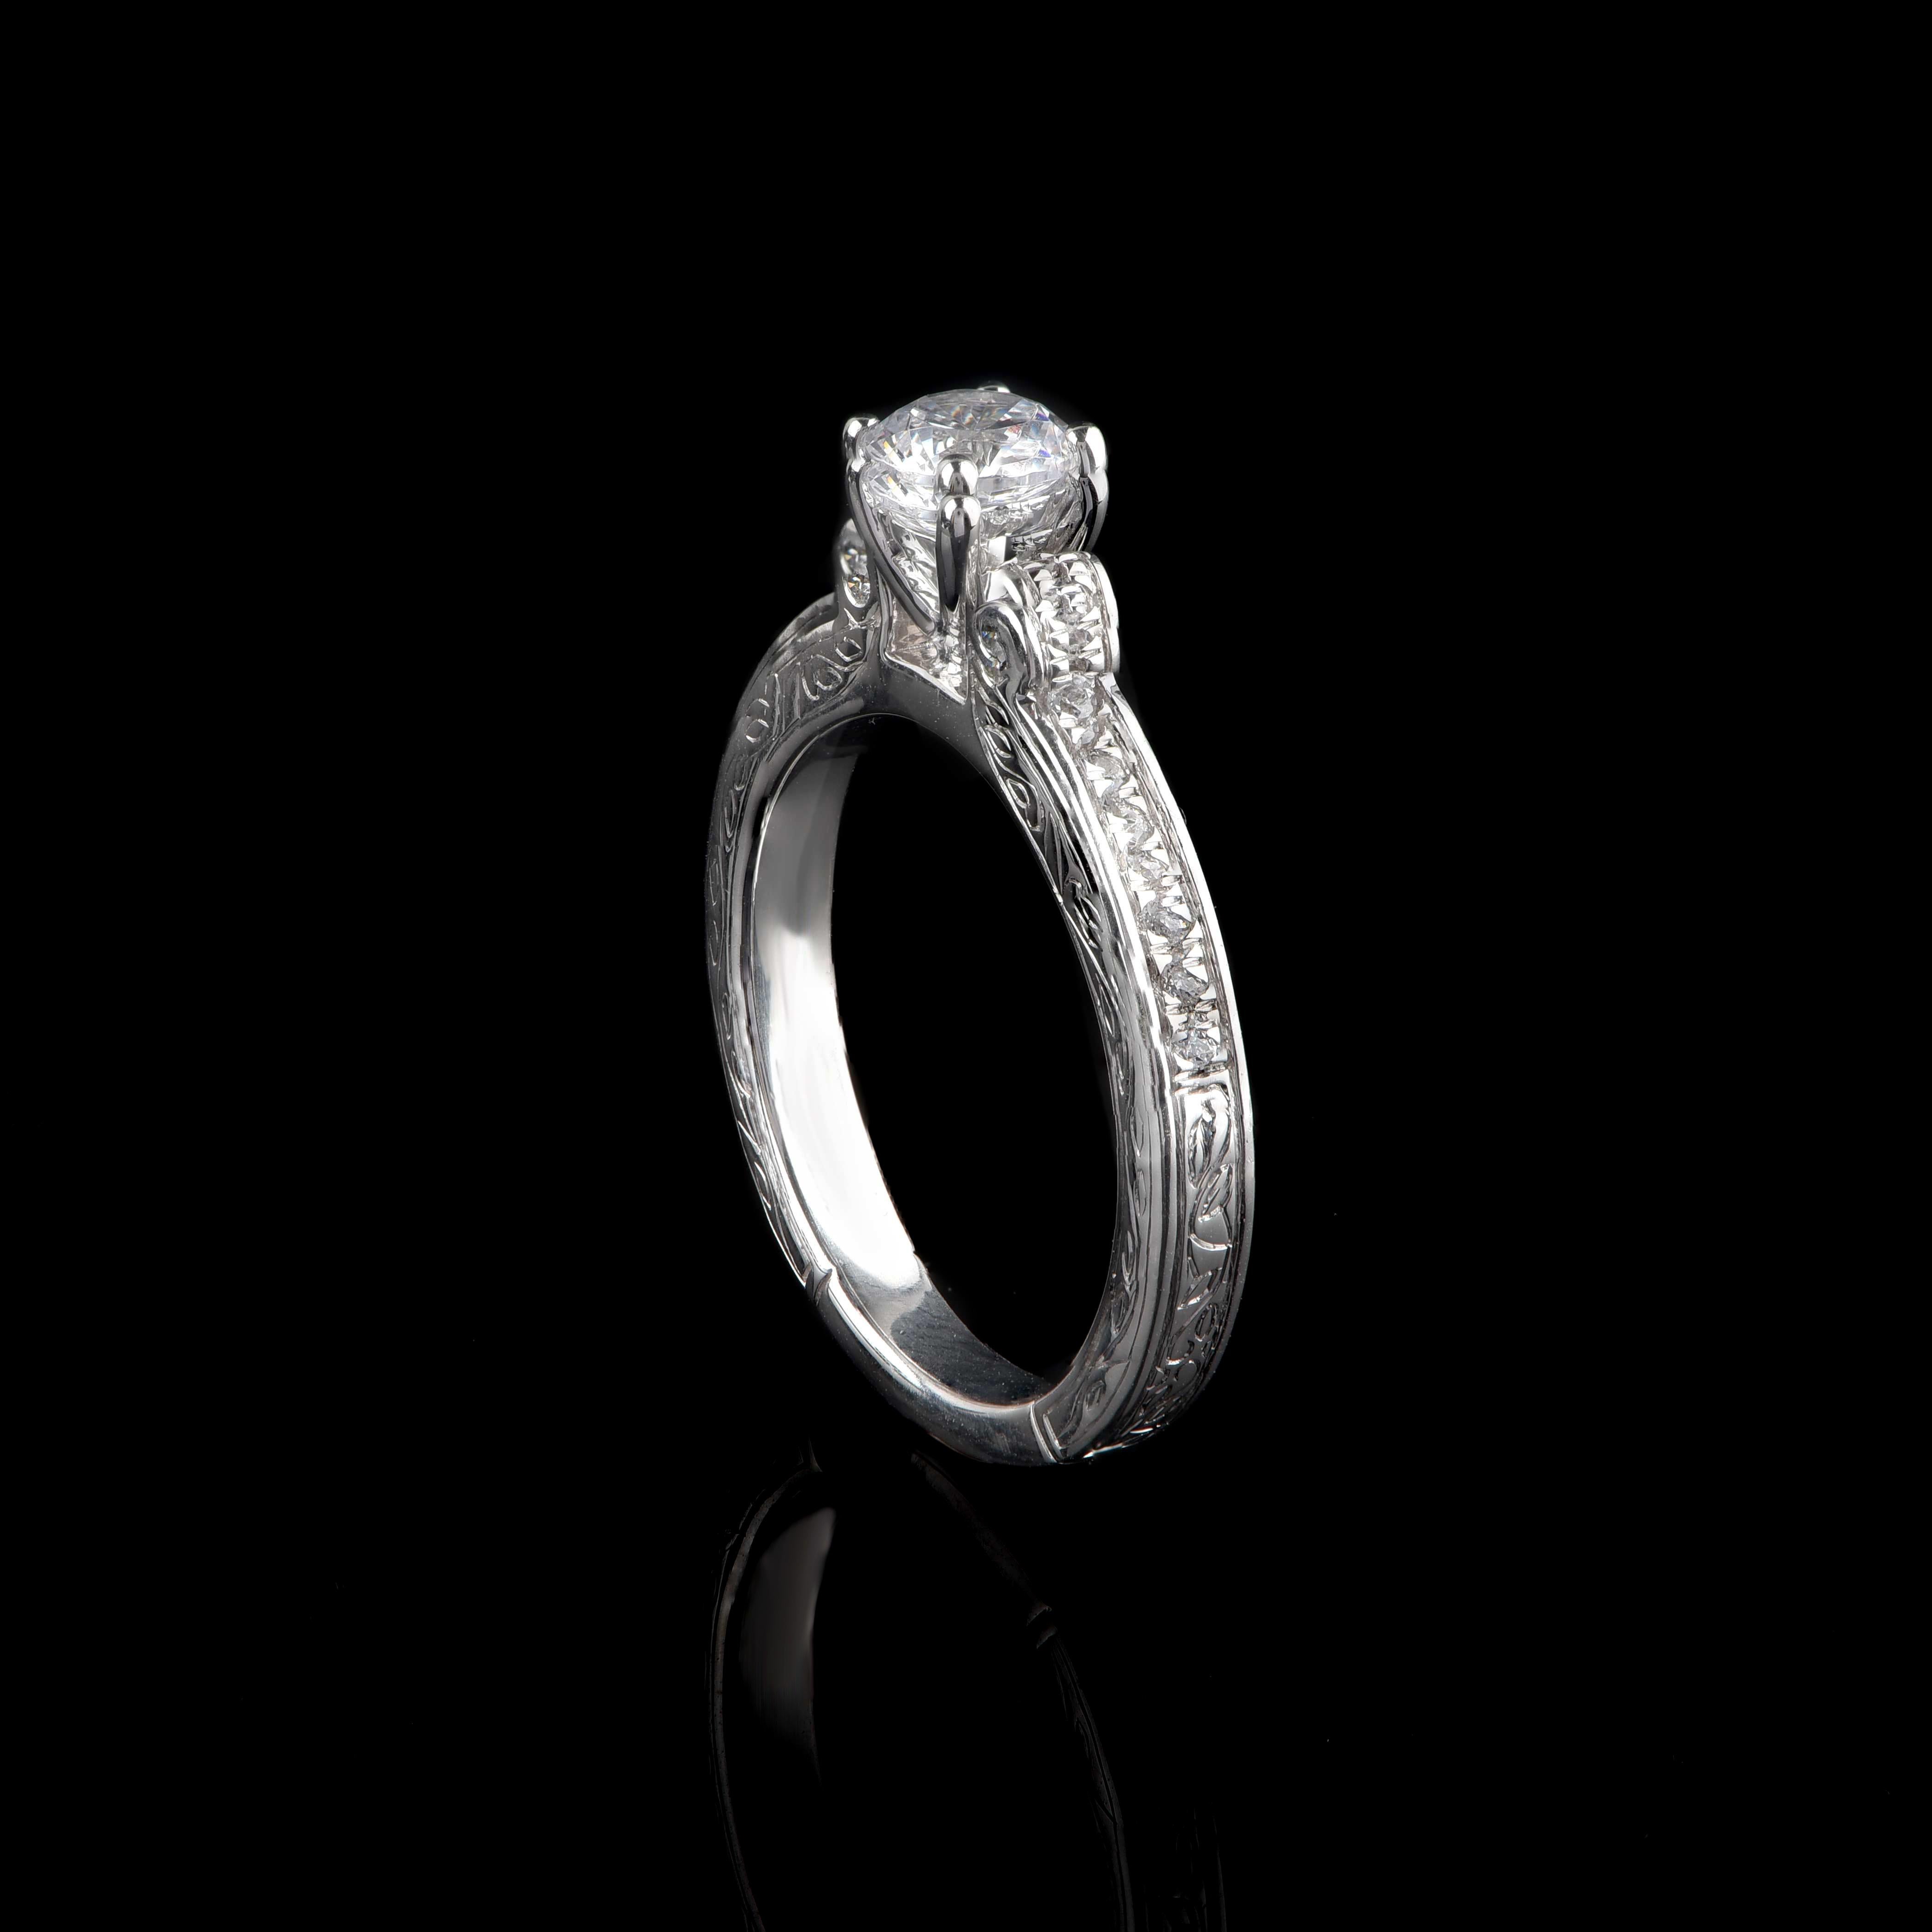 This diamond bridal ring features 24 brilliant-cut diamond and 1 GIA certified centre stone in prong and flush setting. The ring is crafted beautifully in 18-karat white gold. The diamonds are graded H Color, SI1 Clarity. 

Metal color and ring size